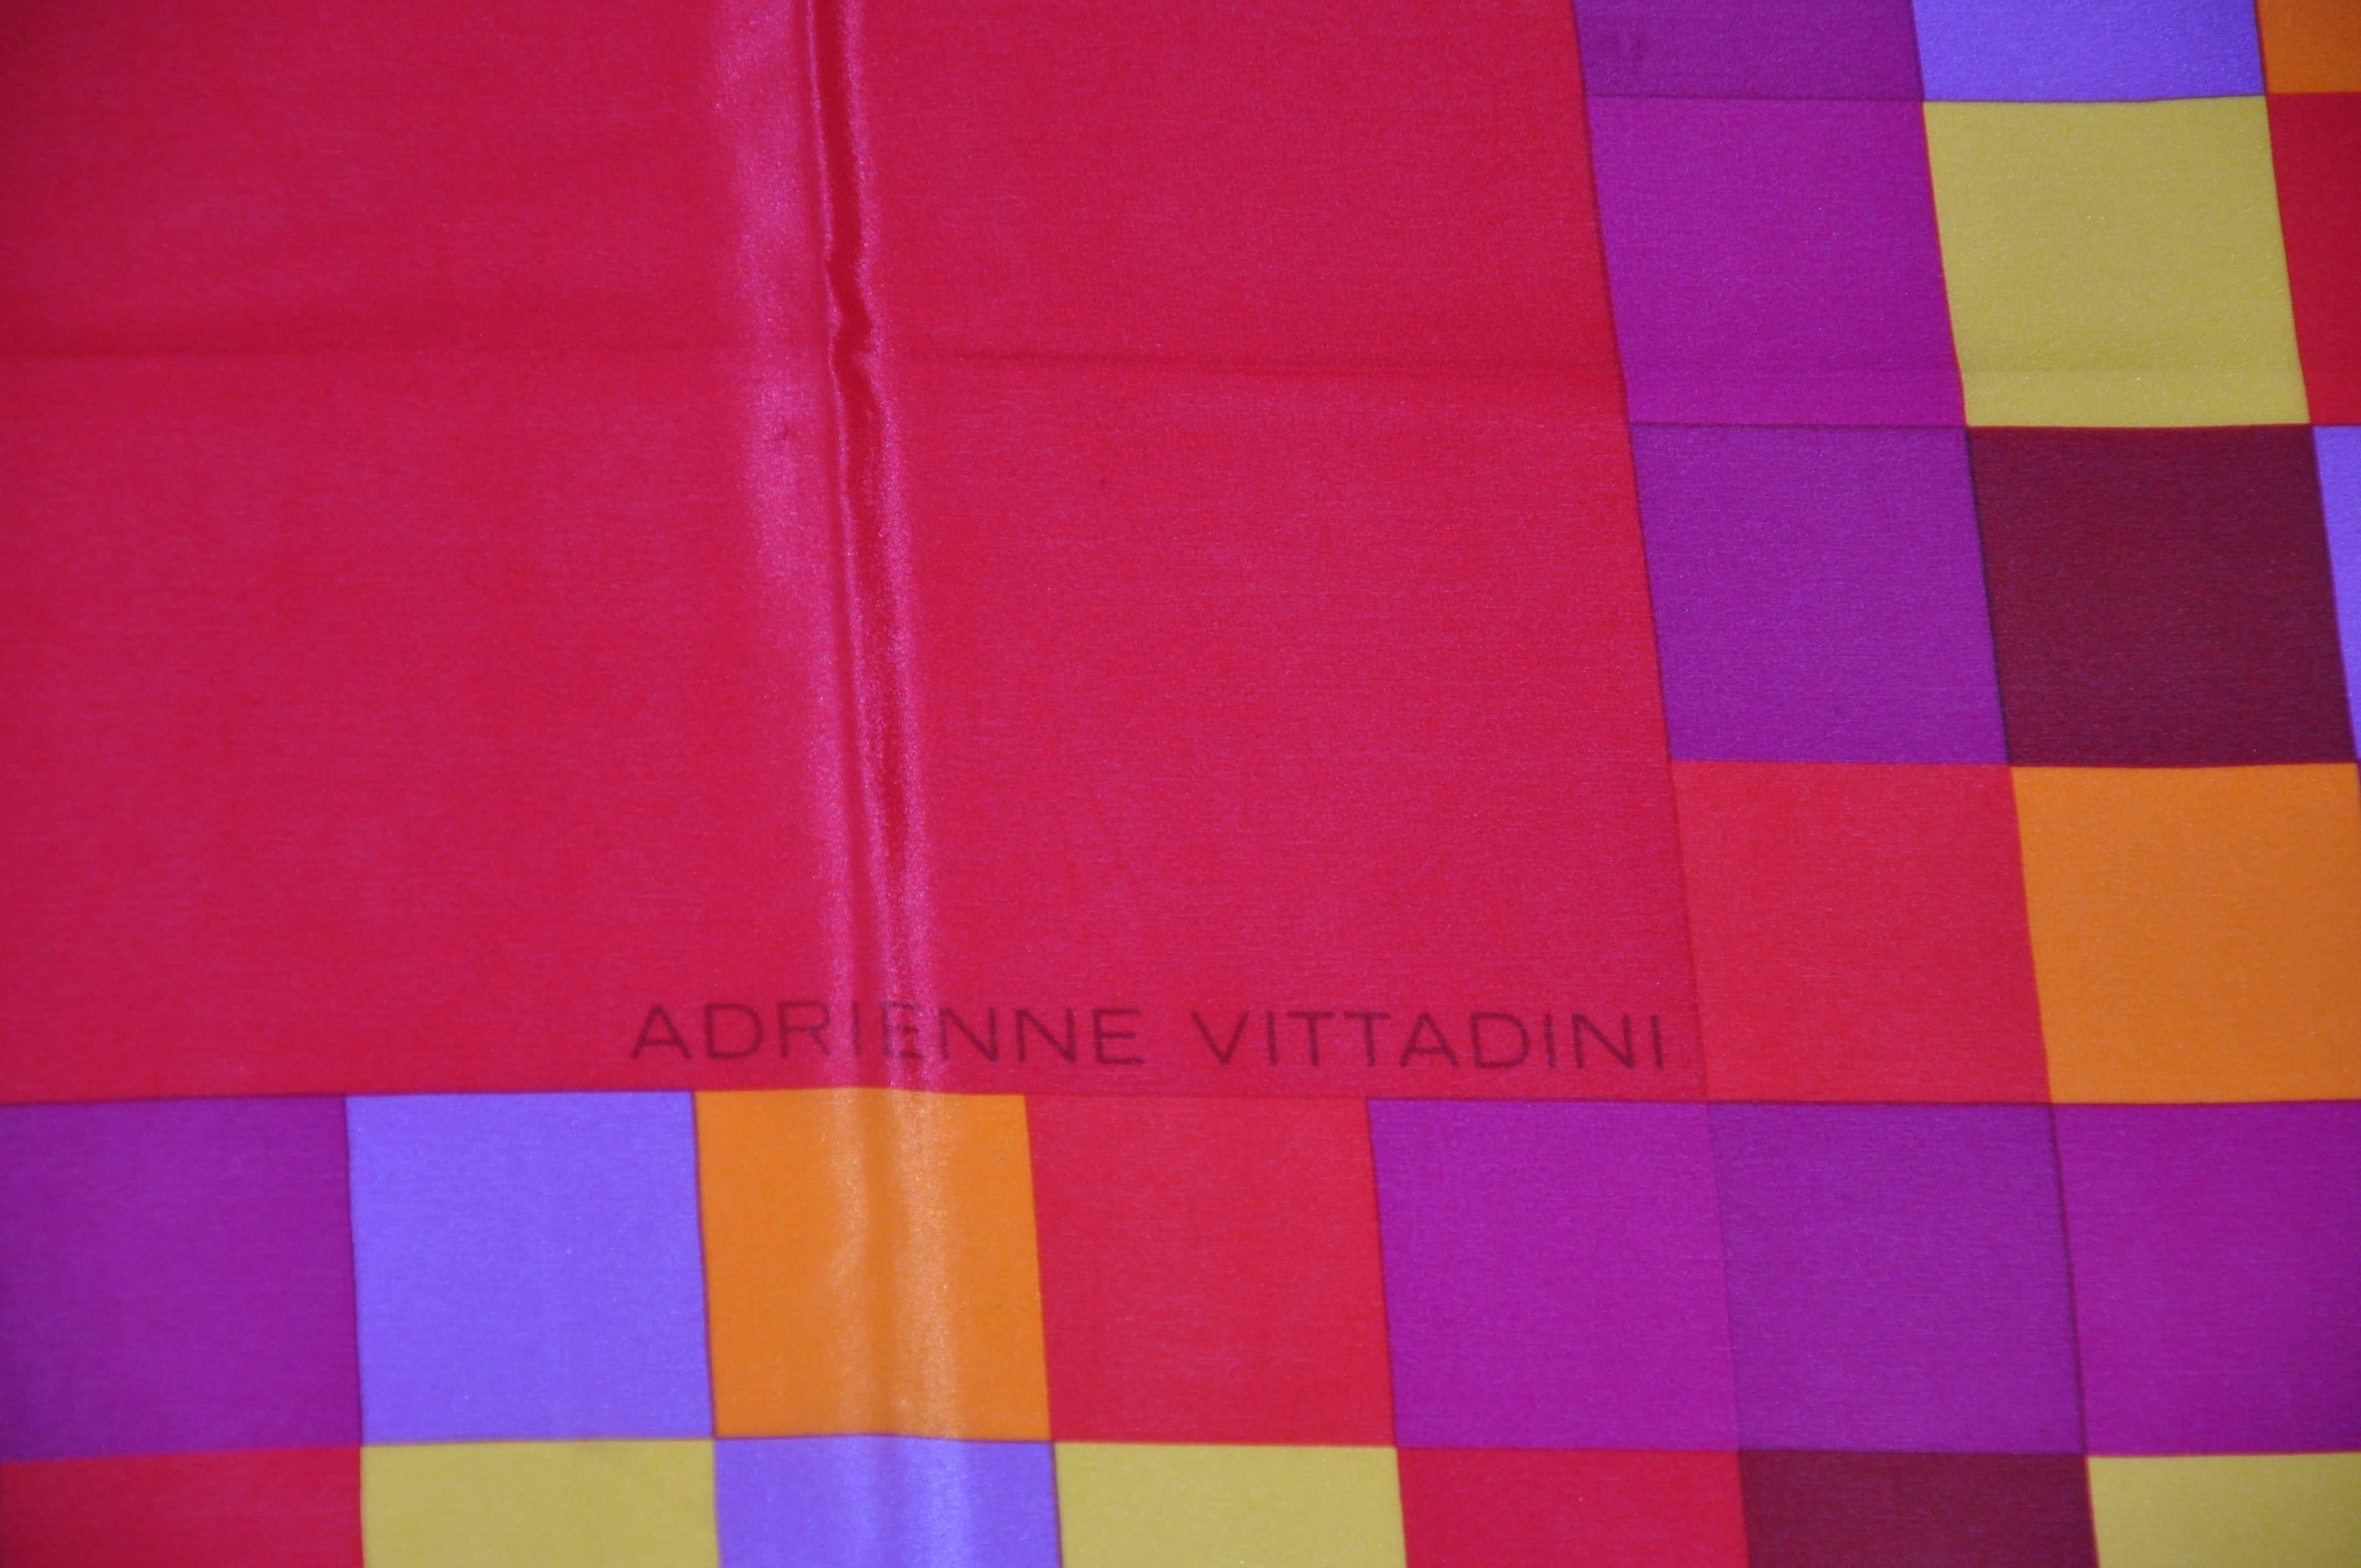 Adrienne Vittadini wonderfully bold and bright red block with mini blocks silk scarf measures 34" x 35", finished with rolled edges, Made in Italy.